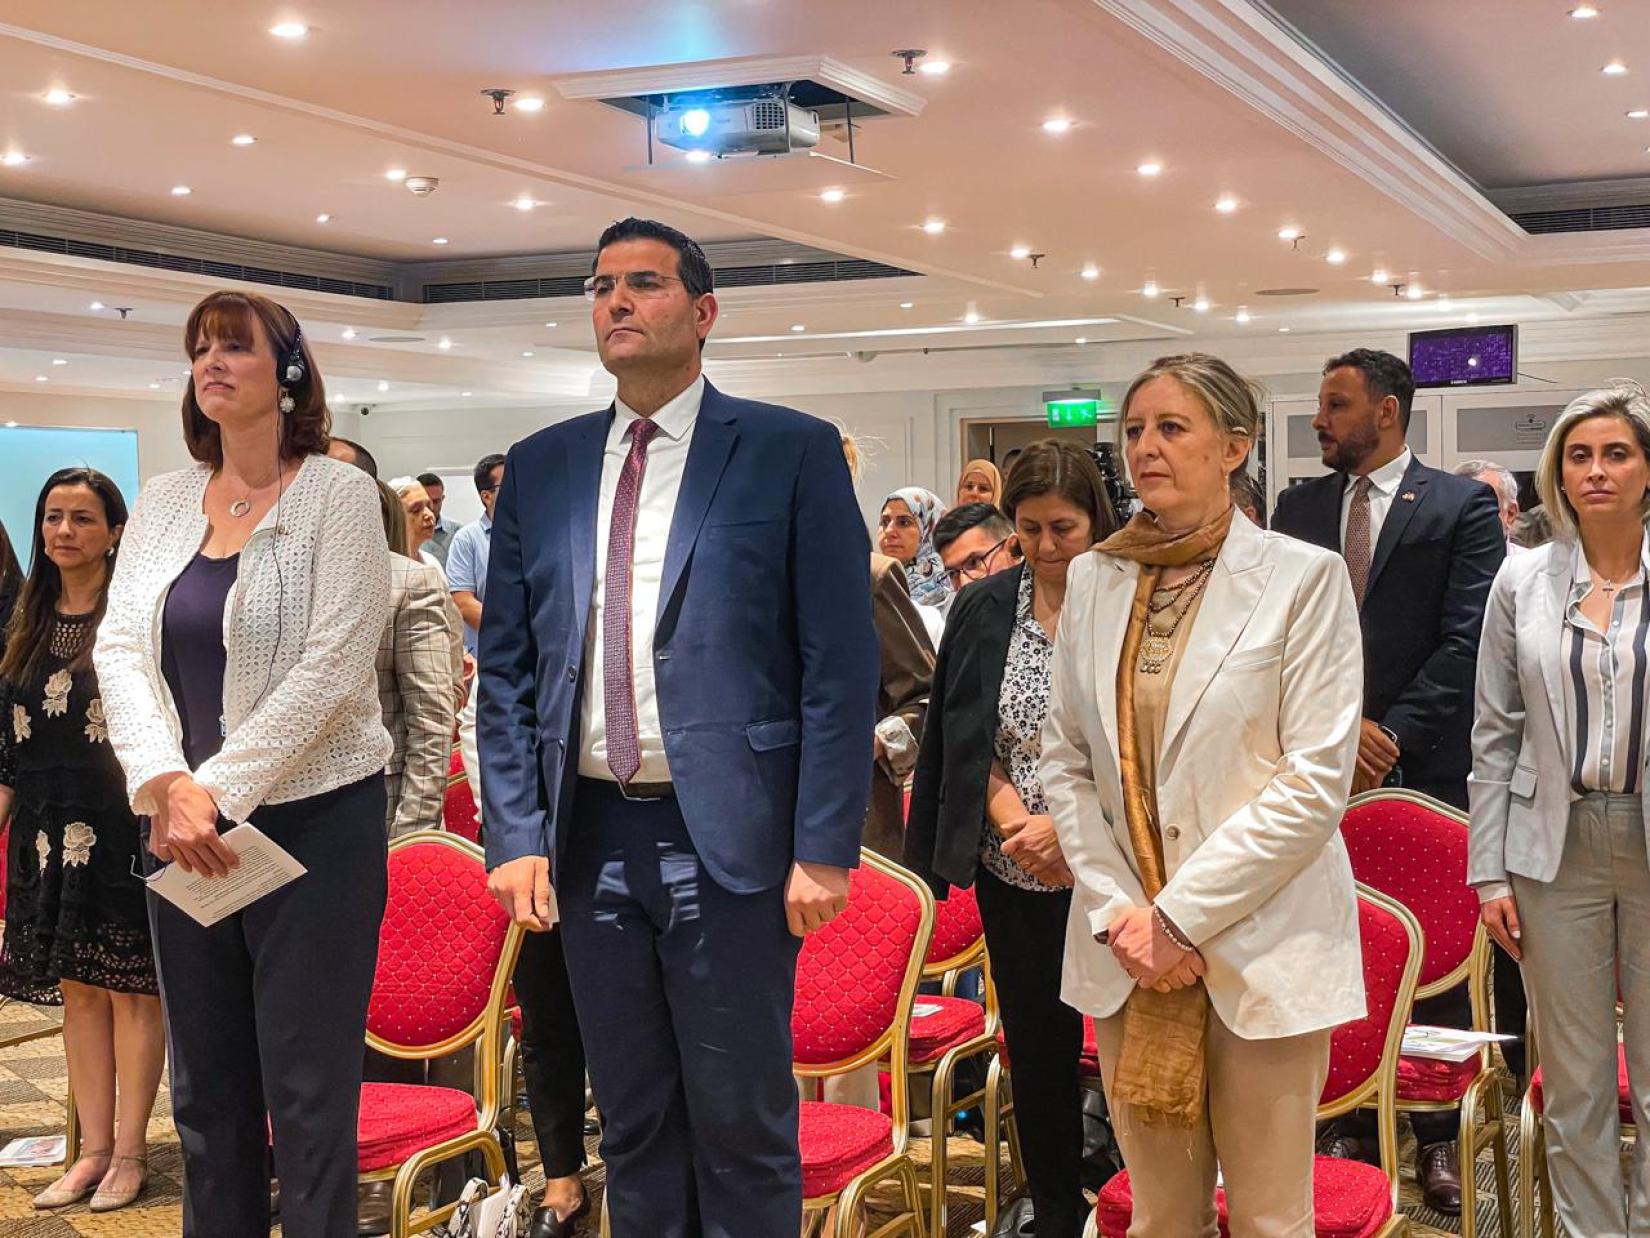 From Left to Right:  Ambassador of Canada to Lebanon, H.E. Stephanie McCollum; Minister of Agriculture, Dr. Abbas Al Hajj Hassan, and the FAO Representative to Lebanon, Nora Ourabah Haddad